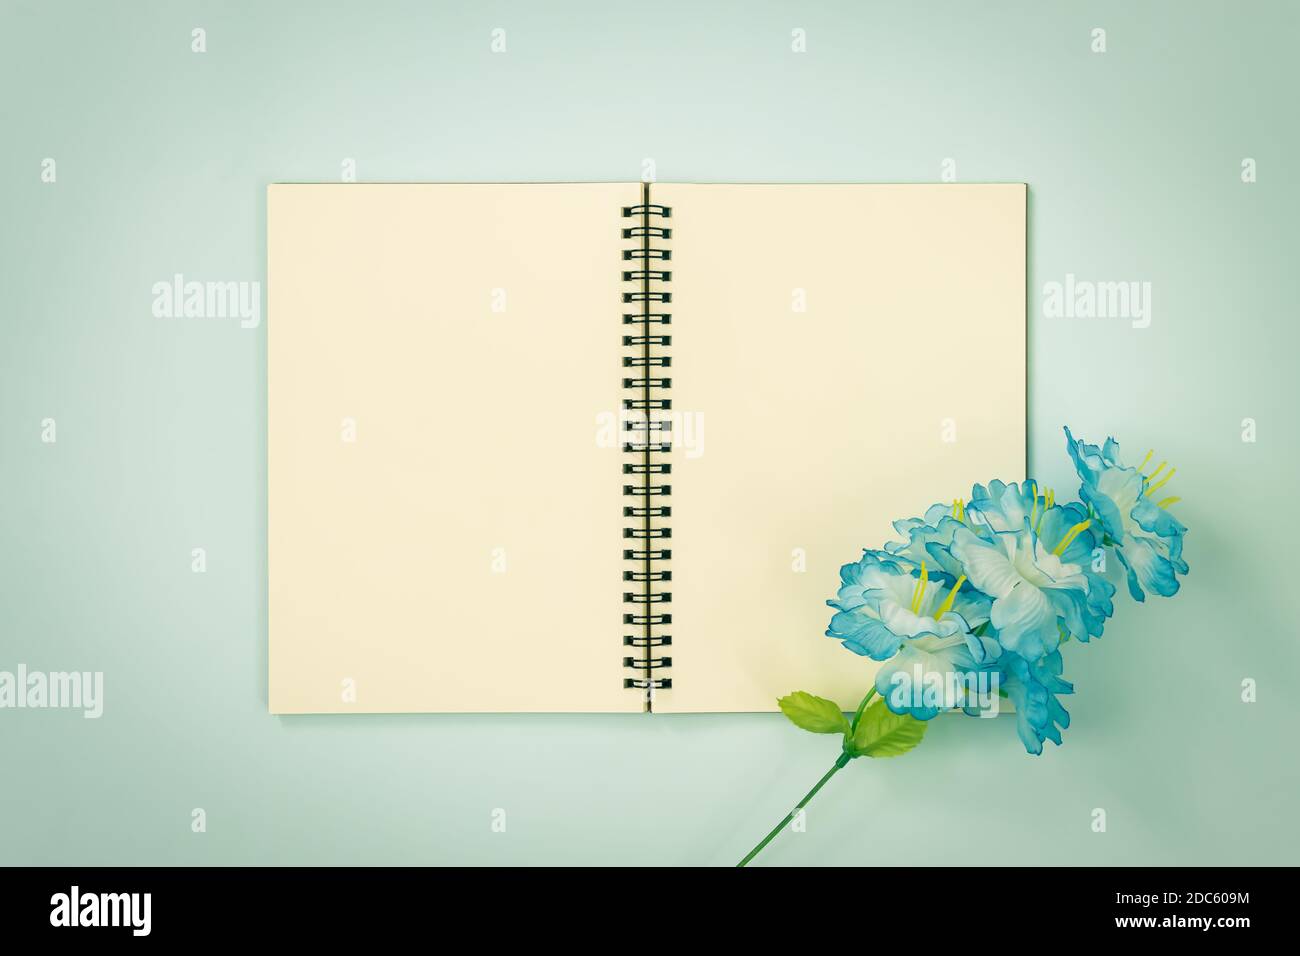 Top Table Spiral Notebook or Spring Notebook Mockup in Unlined Type on Center Frame and Blue Flowers at Bottom Right Corner on Blue Pastel Minimalist Stock Photo